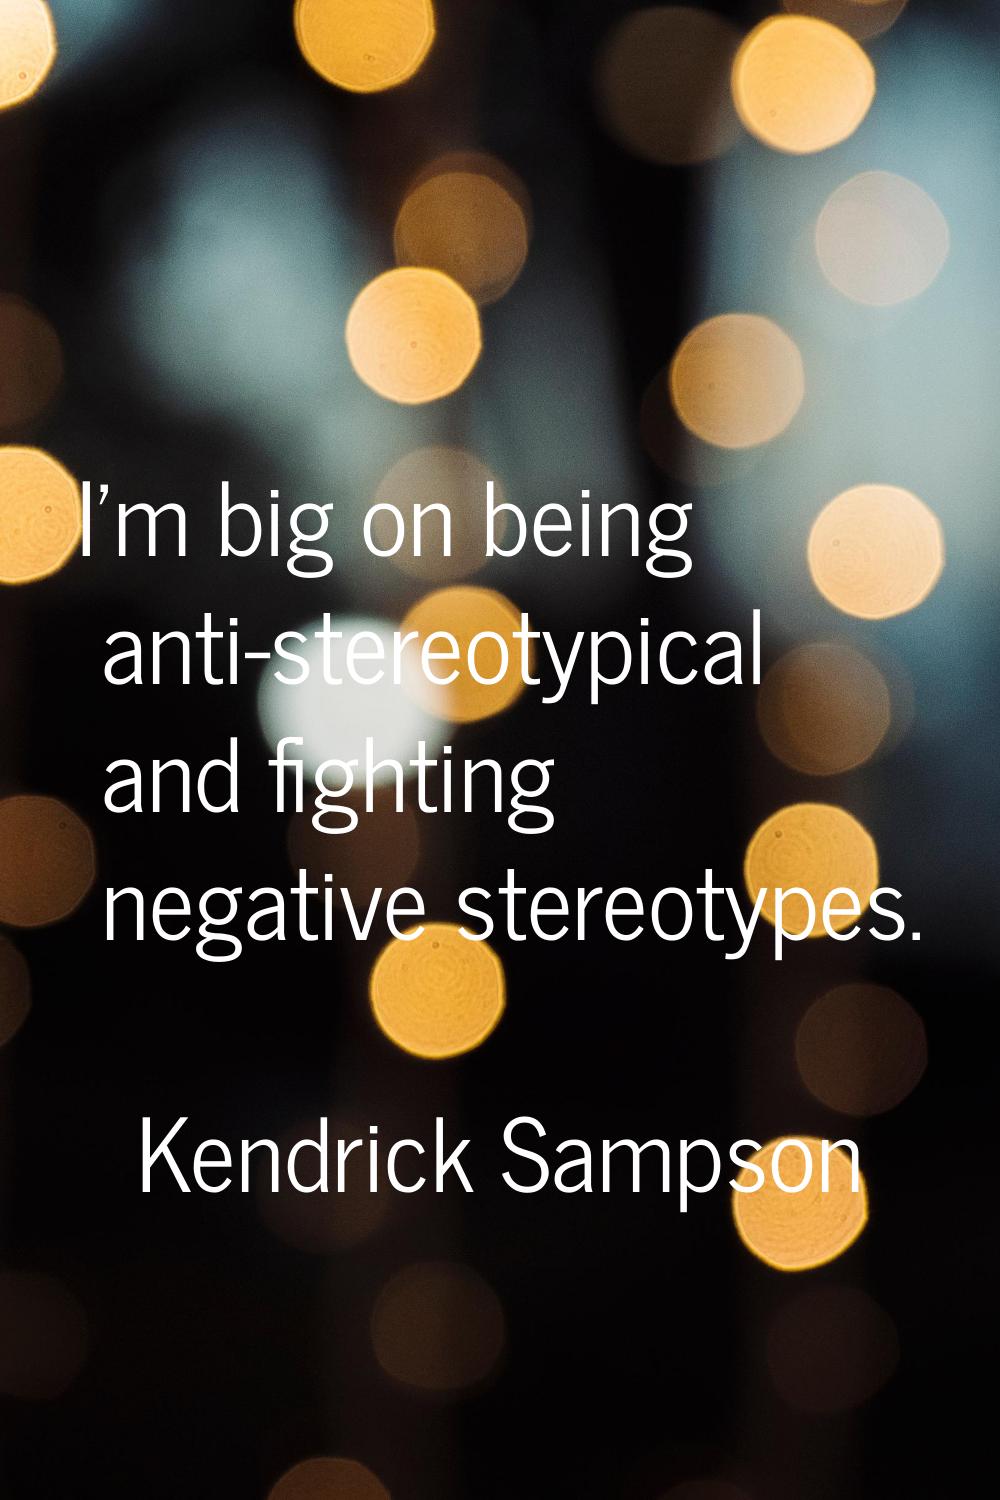 I'm big on being anti-stereotypical and fighting negative stereotypes.